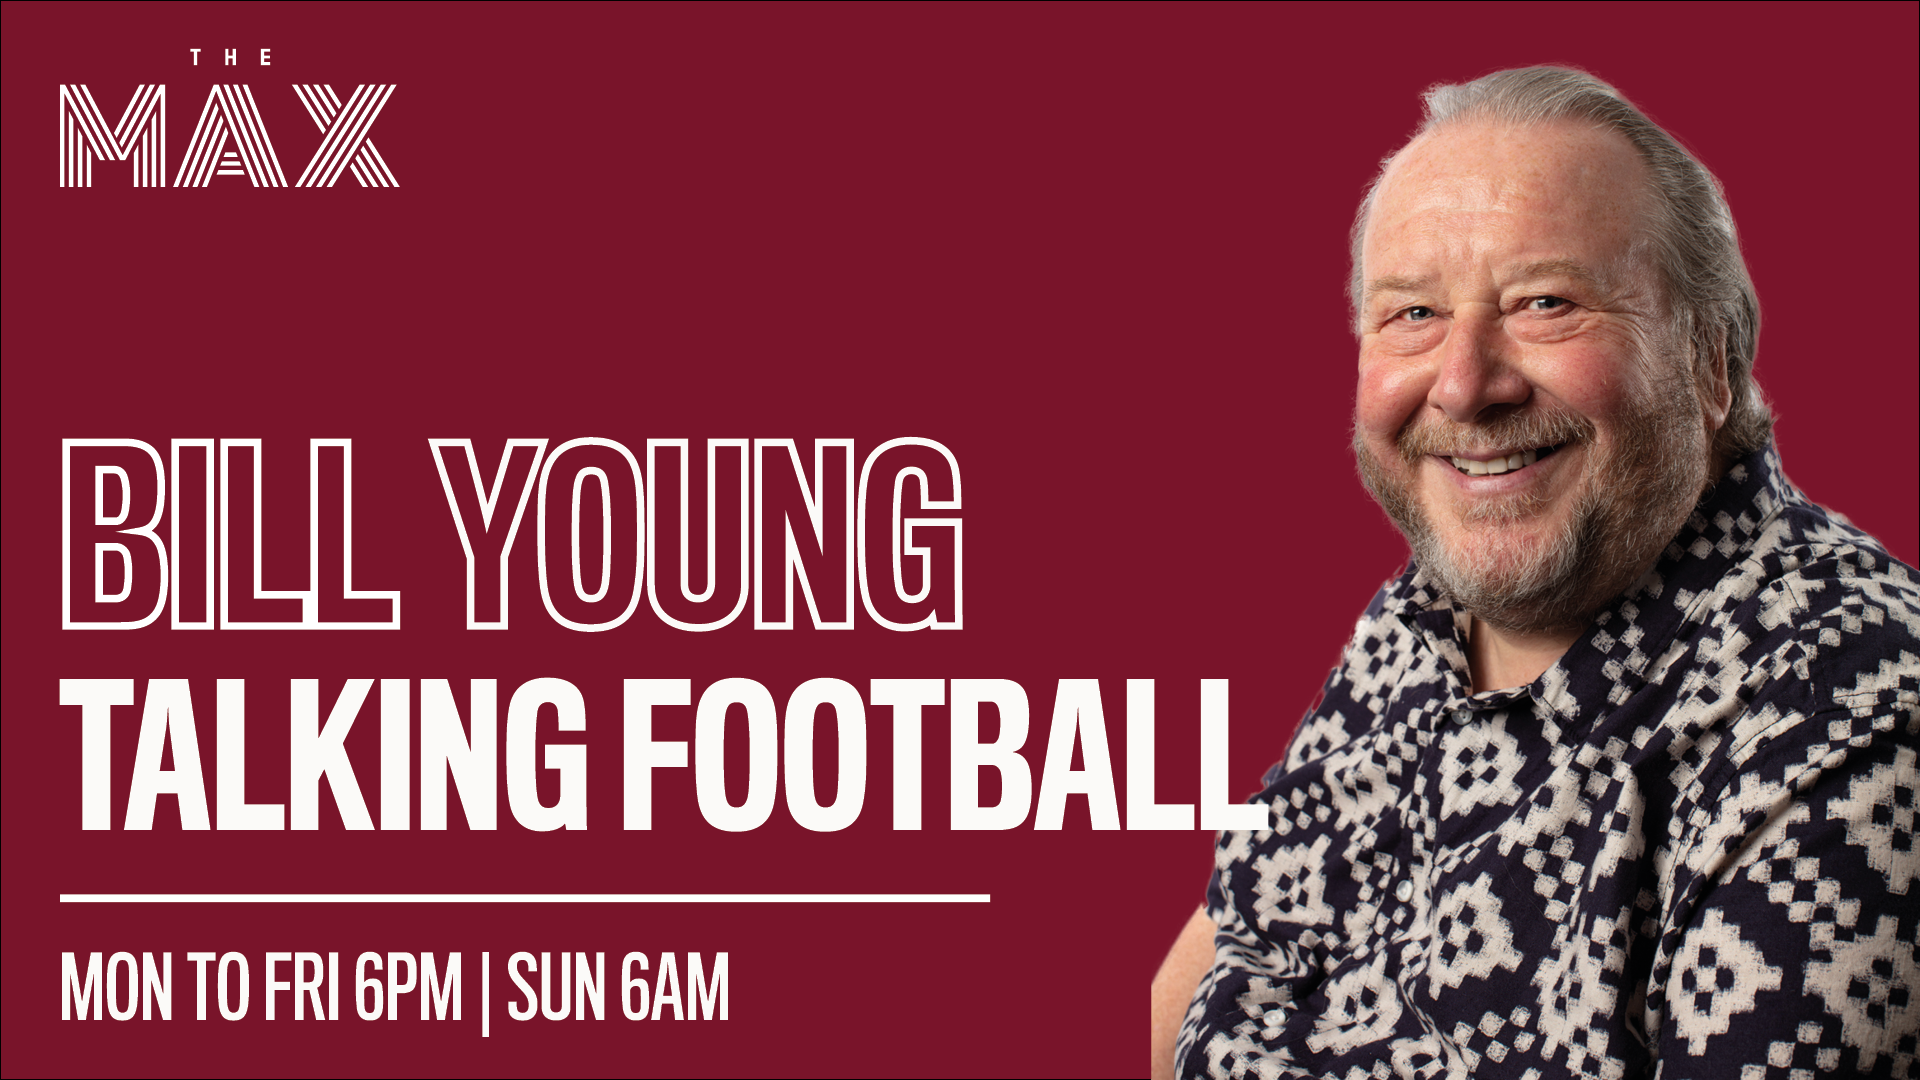 Talking Football with Bill Young - Friday 2nd April